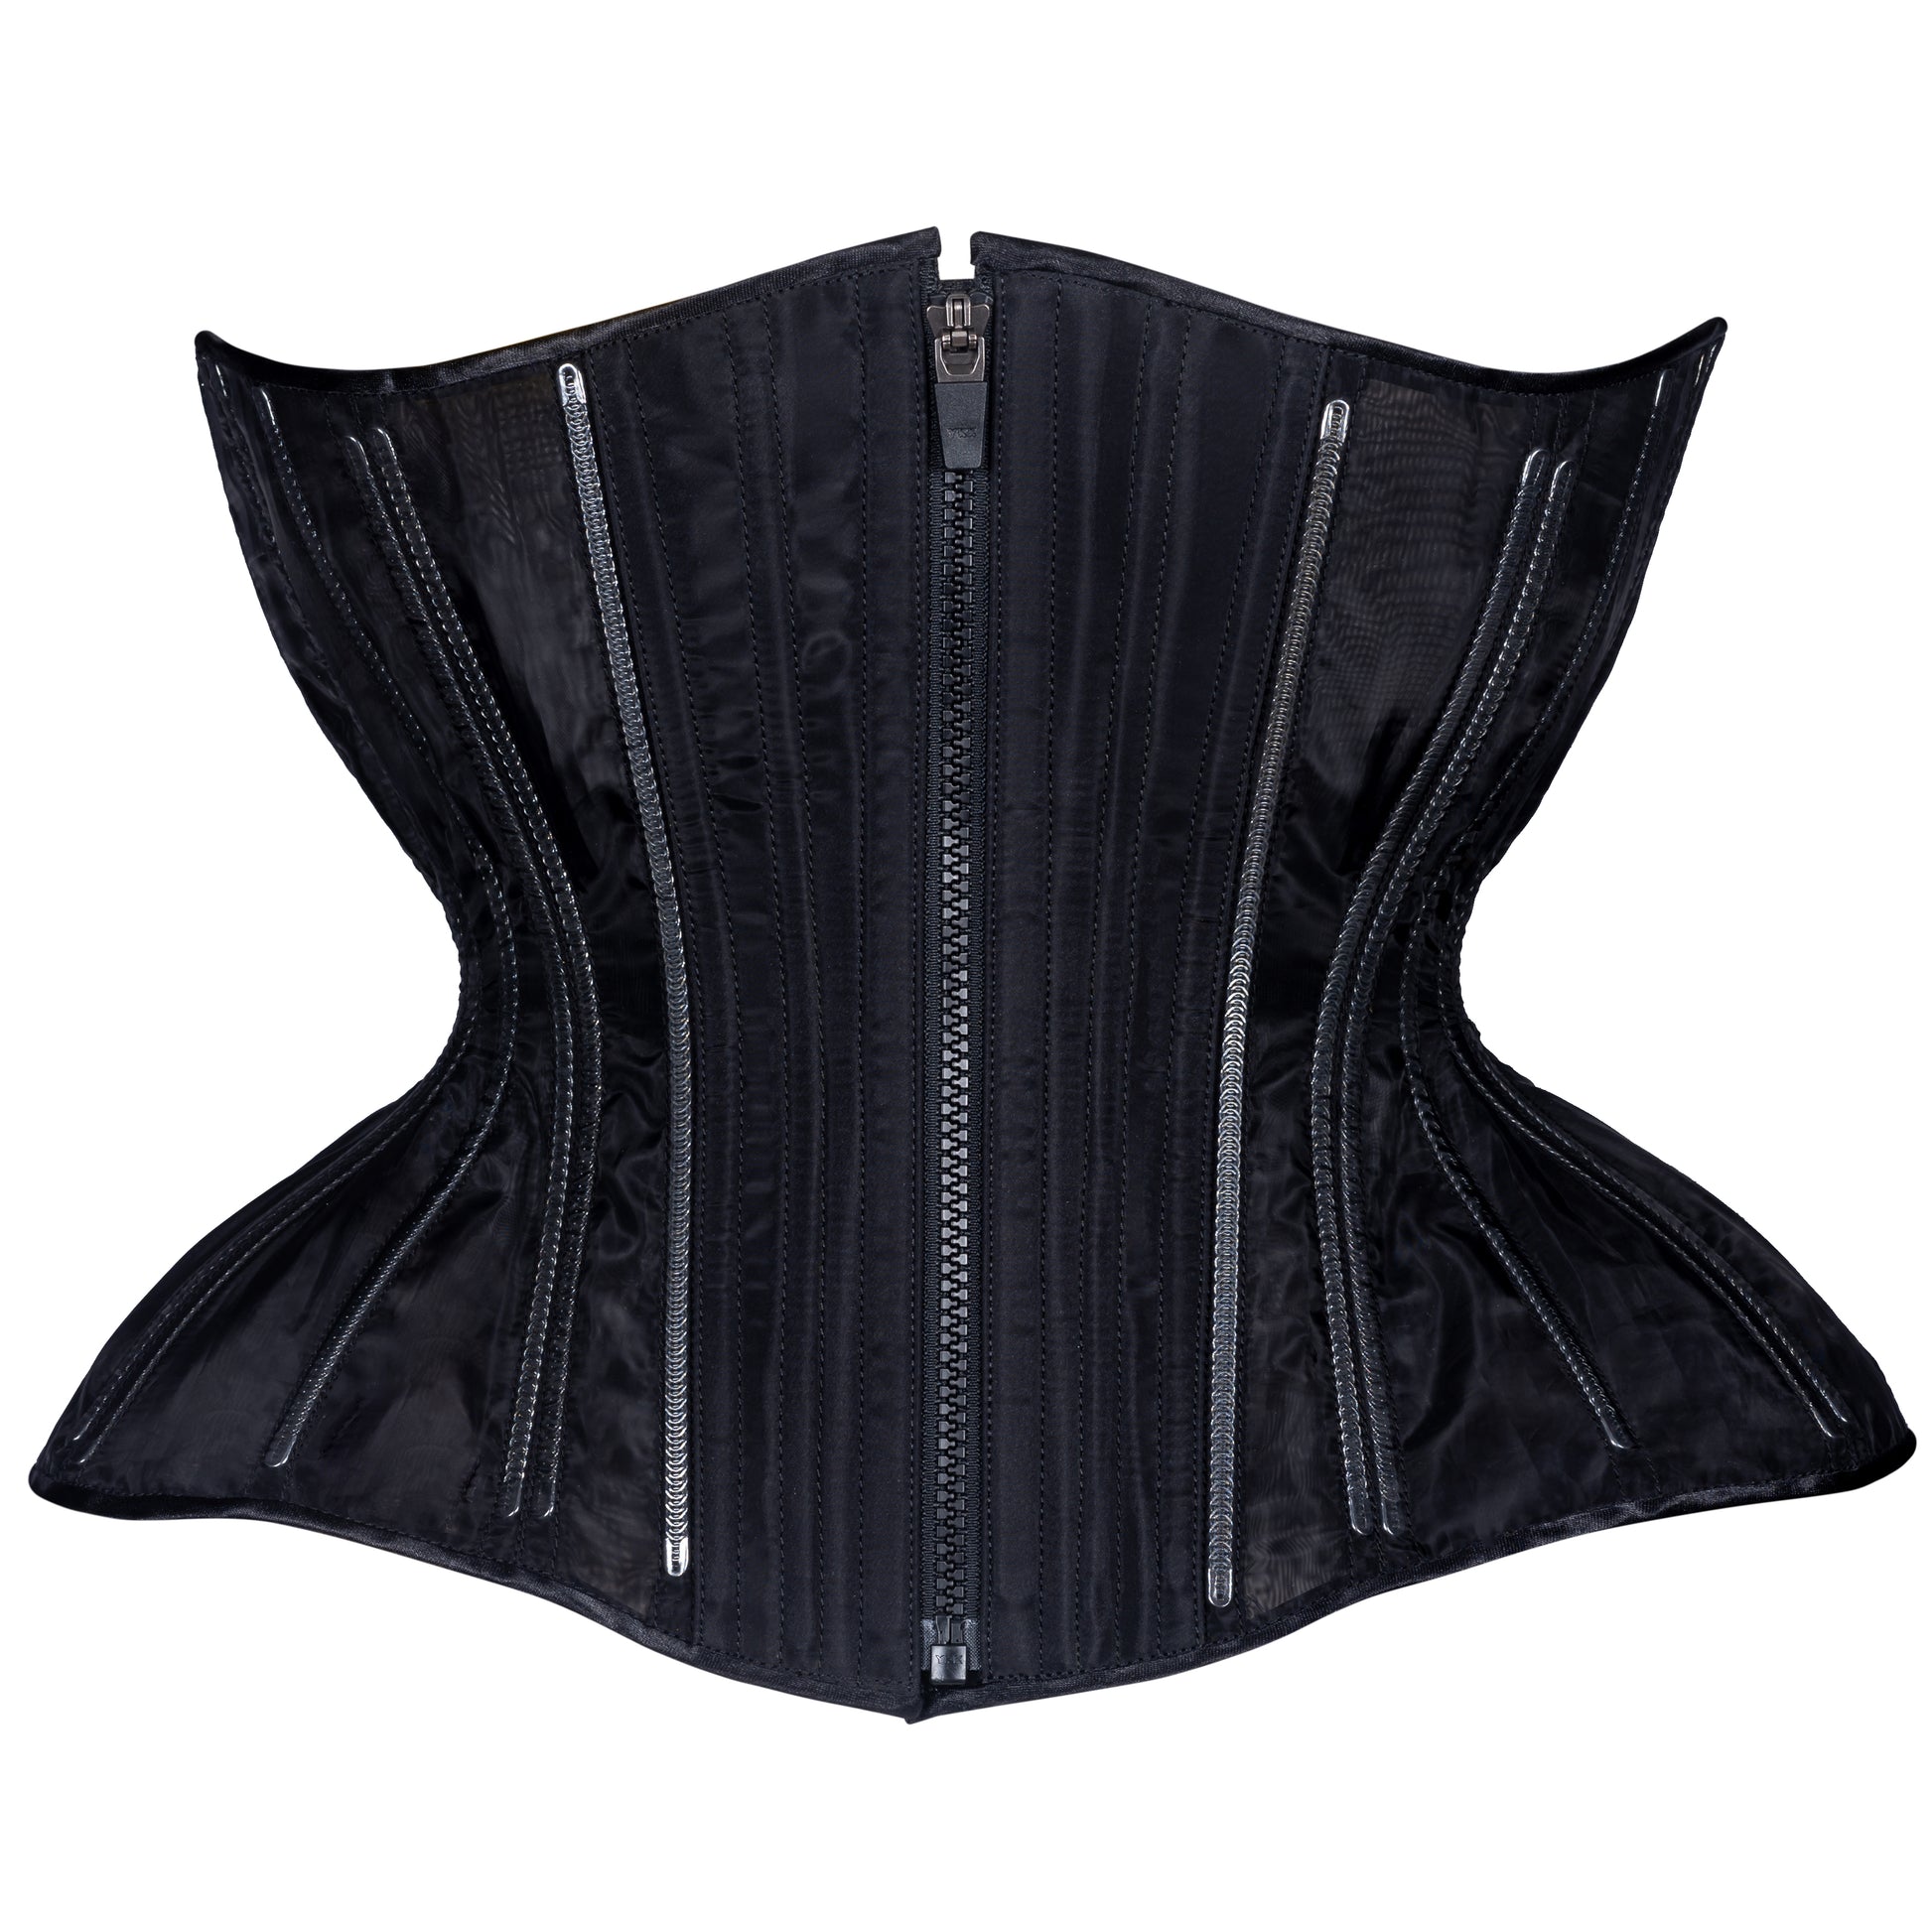 Emay Laser Cut Non-Scratch Corset with Comfortable Legs Black 2814s -  Trendyol